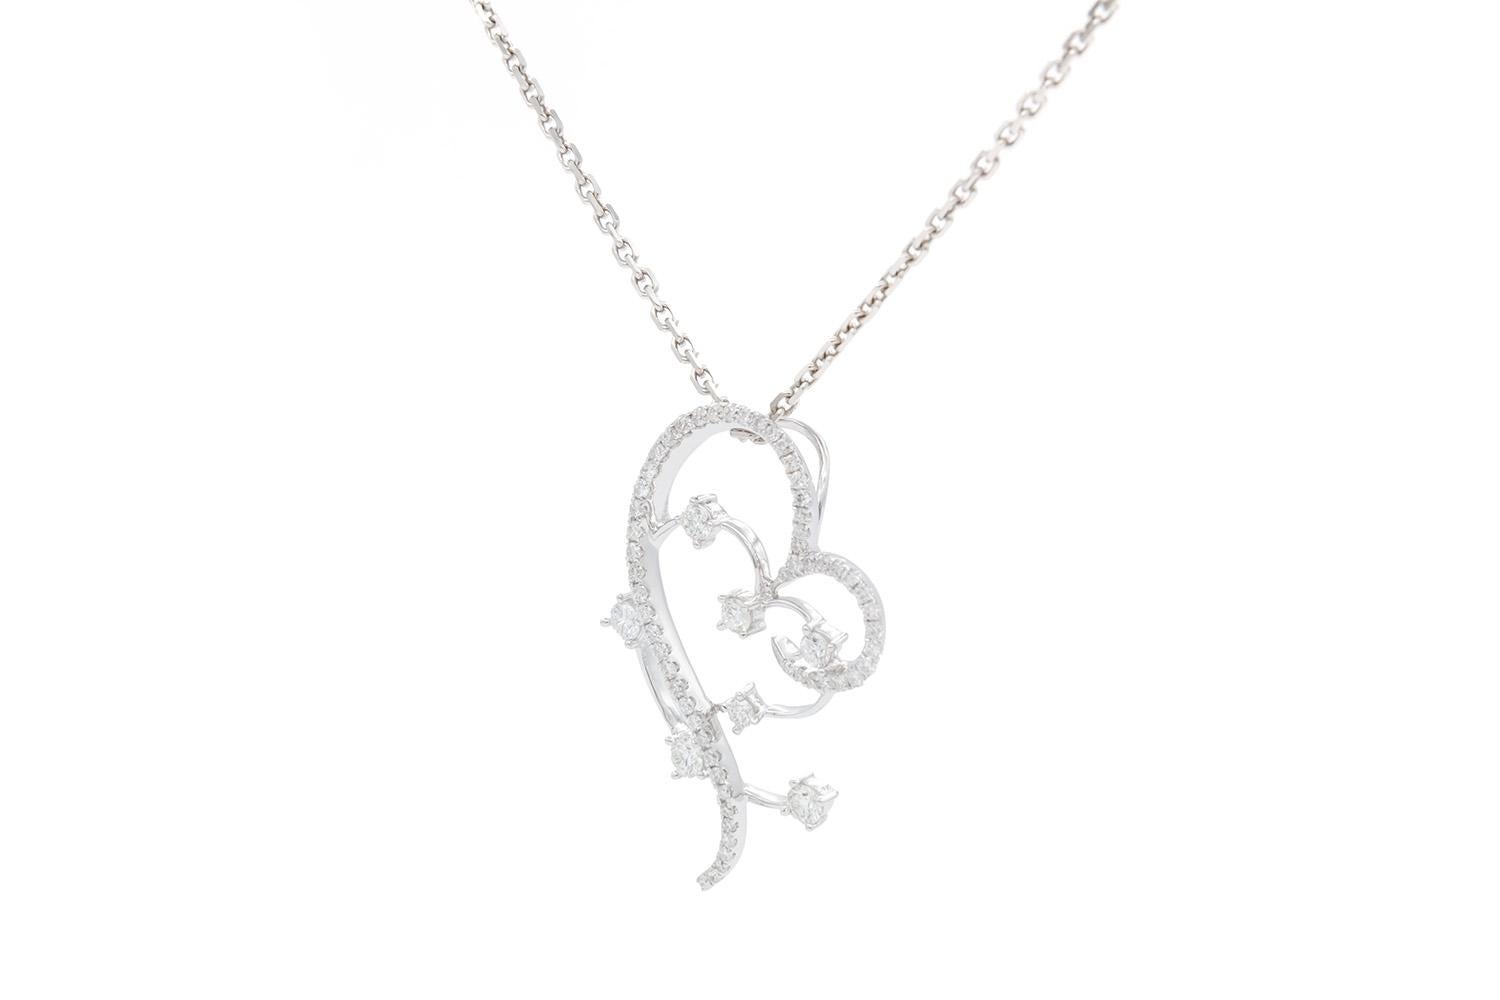 Contemporary 18k White Gold & Diamond Sweeping Heart Silhouette Pendant Necklace For Sale